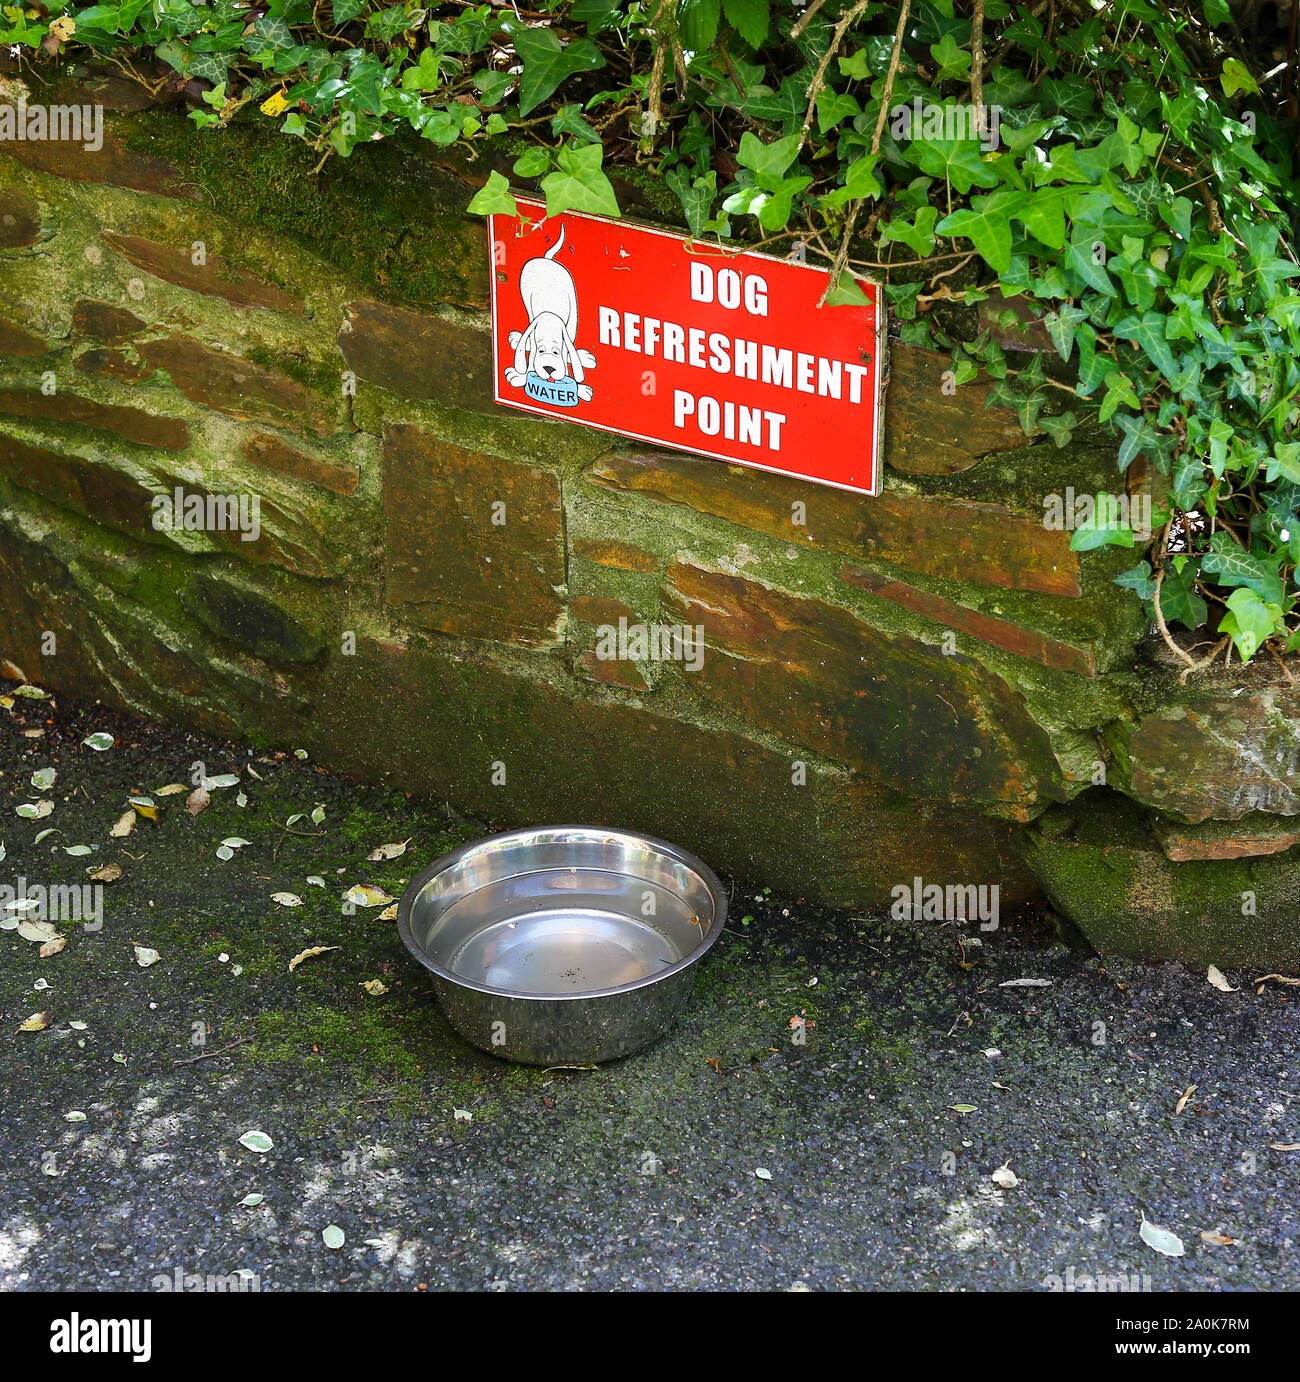 A sign over a dog bowl with water in it saying 'dog refreshment point', England, UK Stock Photo